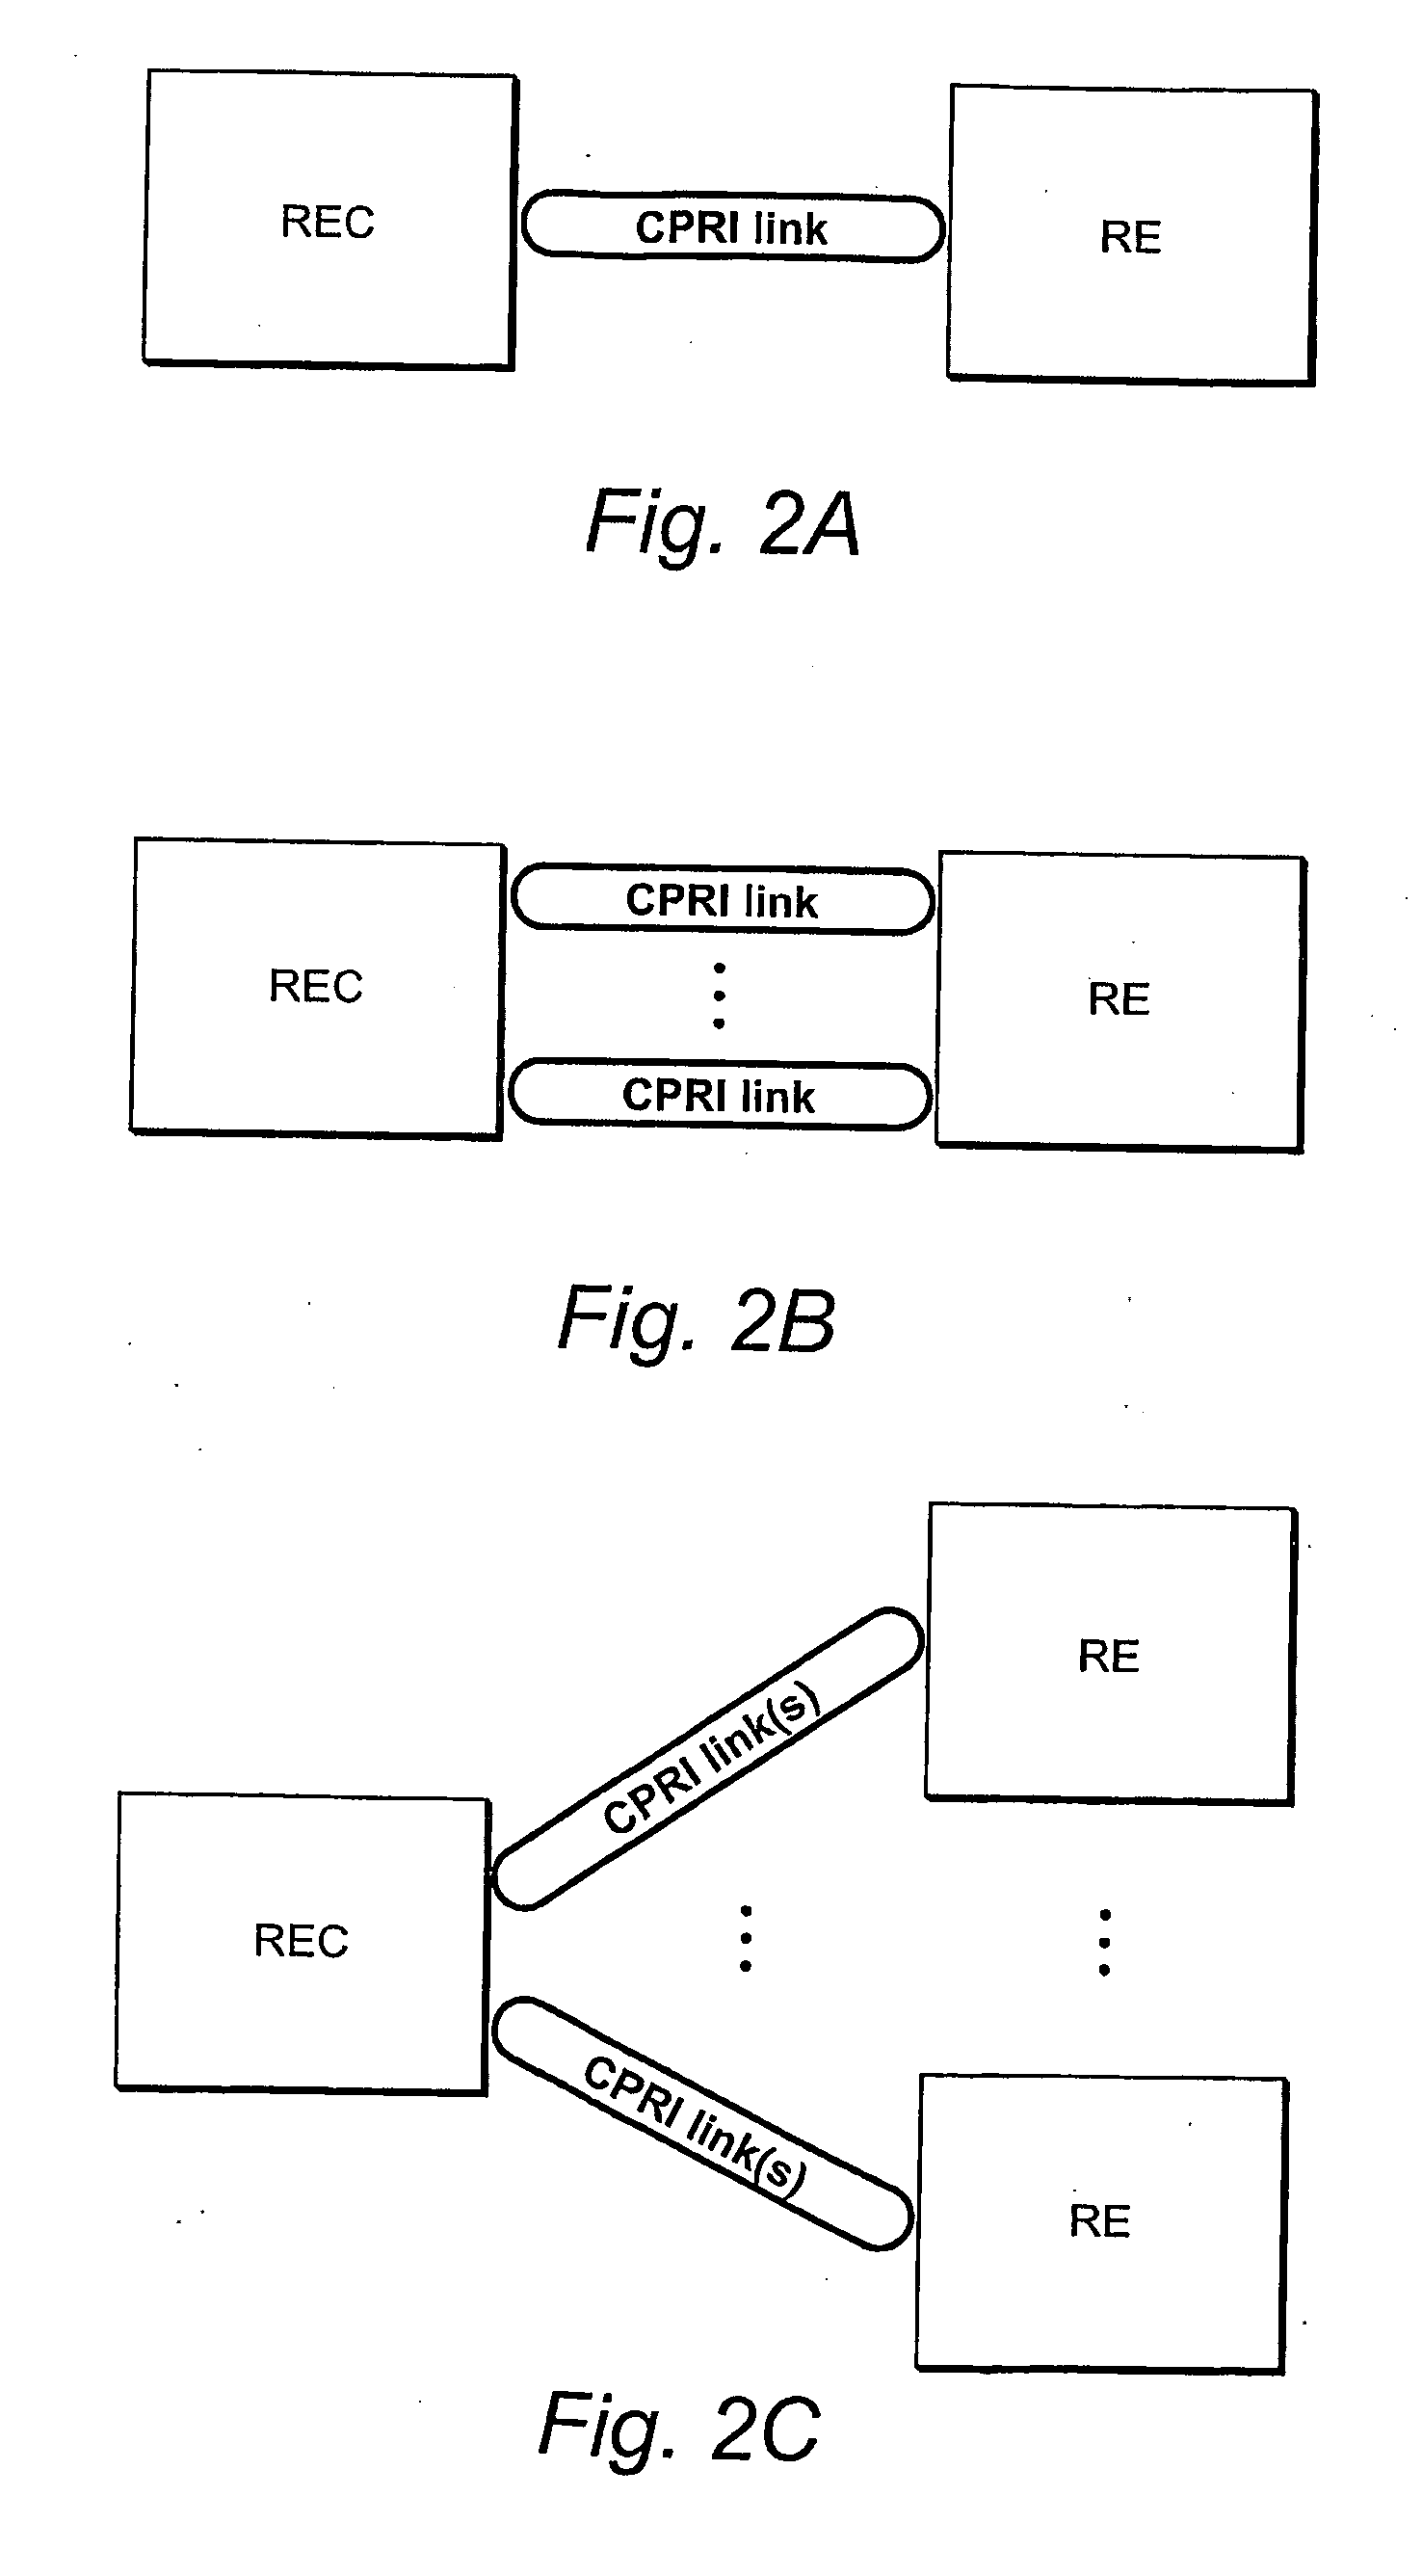 Interface, apparatus, and method for communication between a radio eqipment control node one or more remote radio equipment nodes